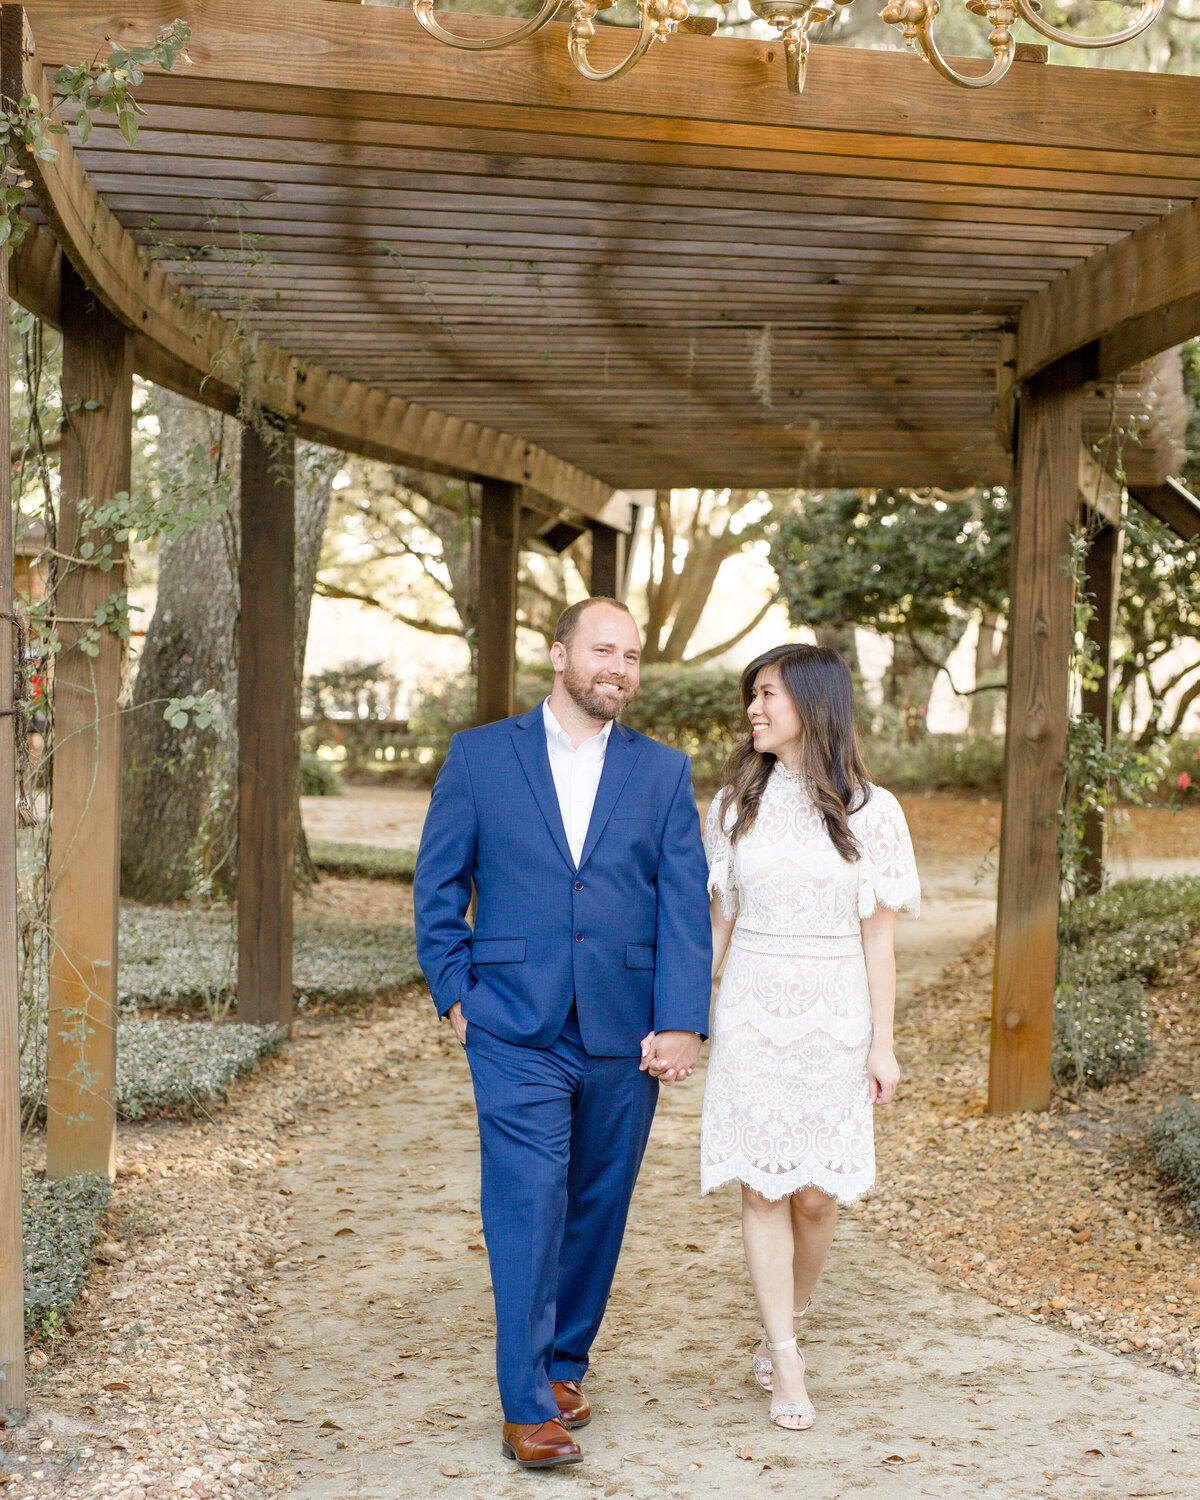 couple engagement session walkingby Lucas Mason Photography in Orlando, Windermere, Winder Garden area